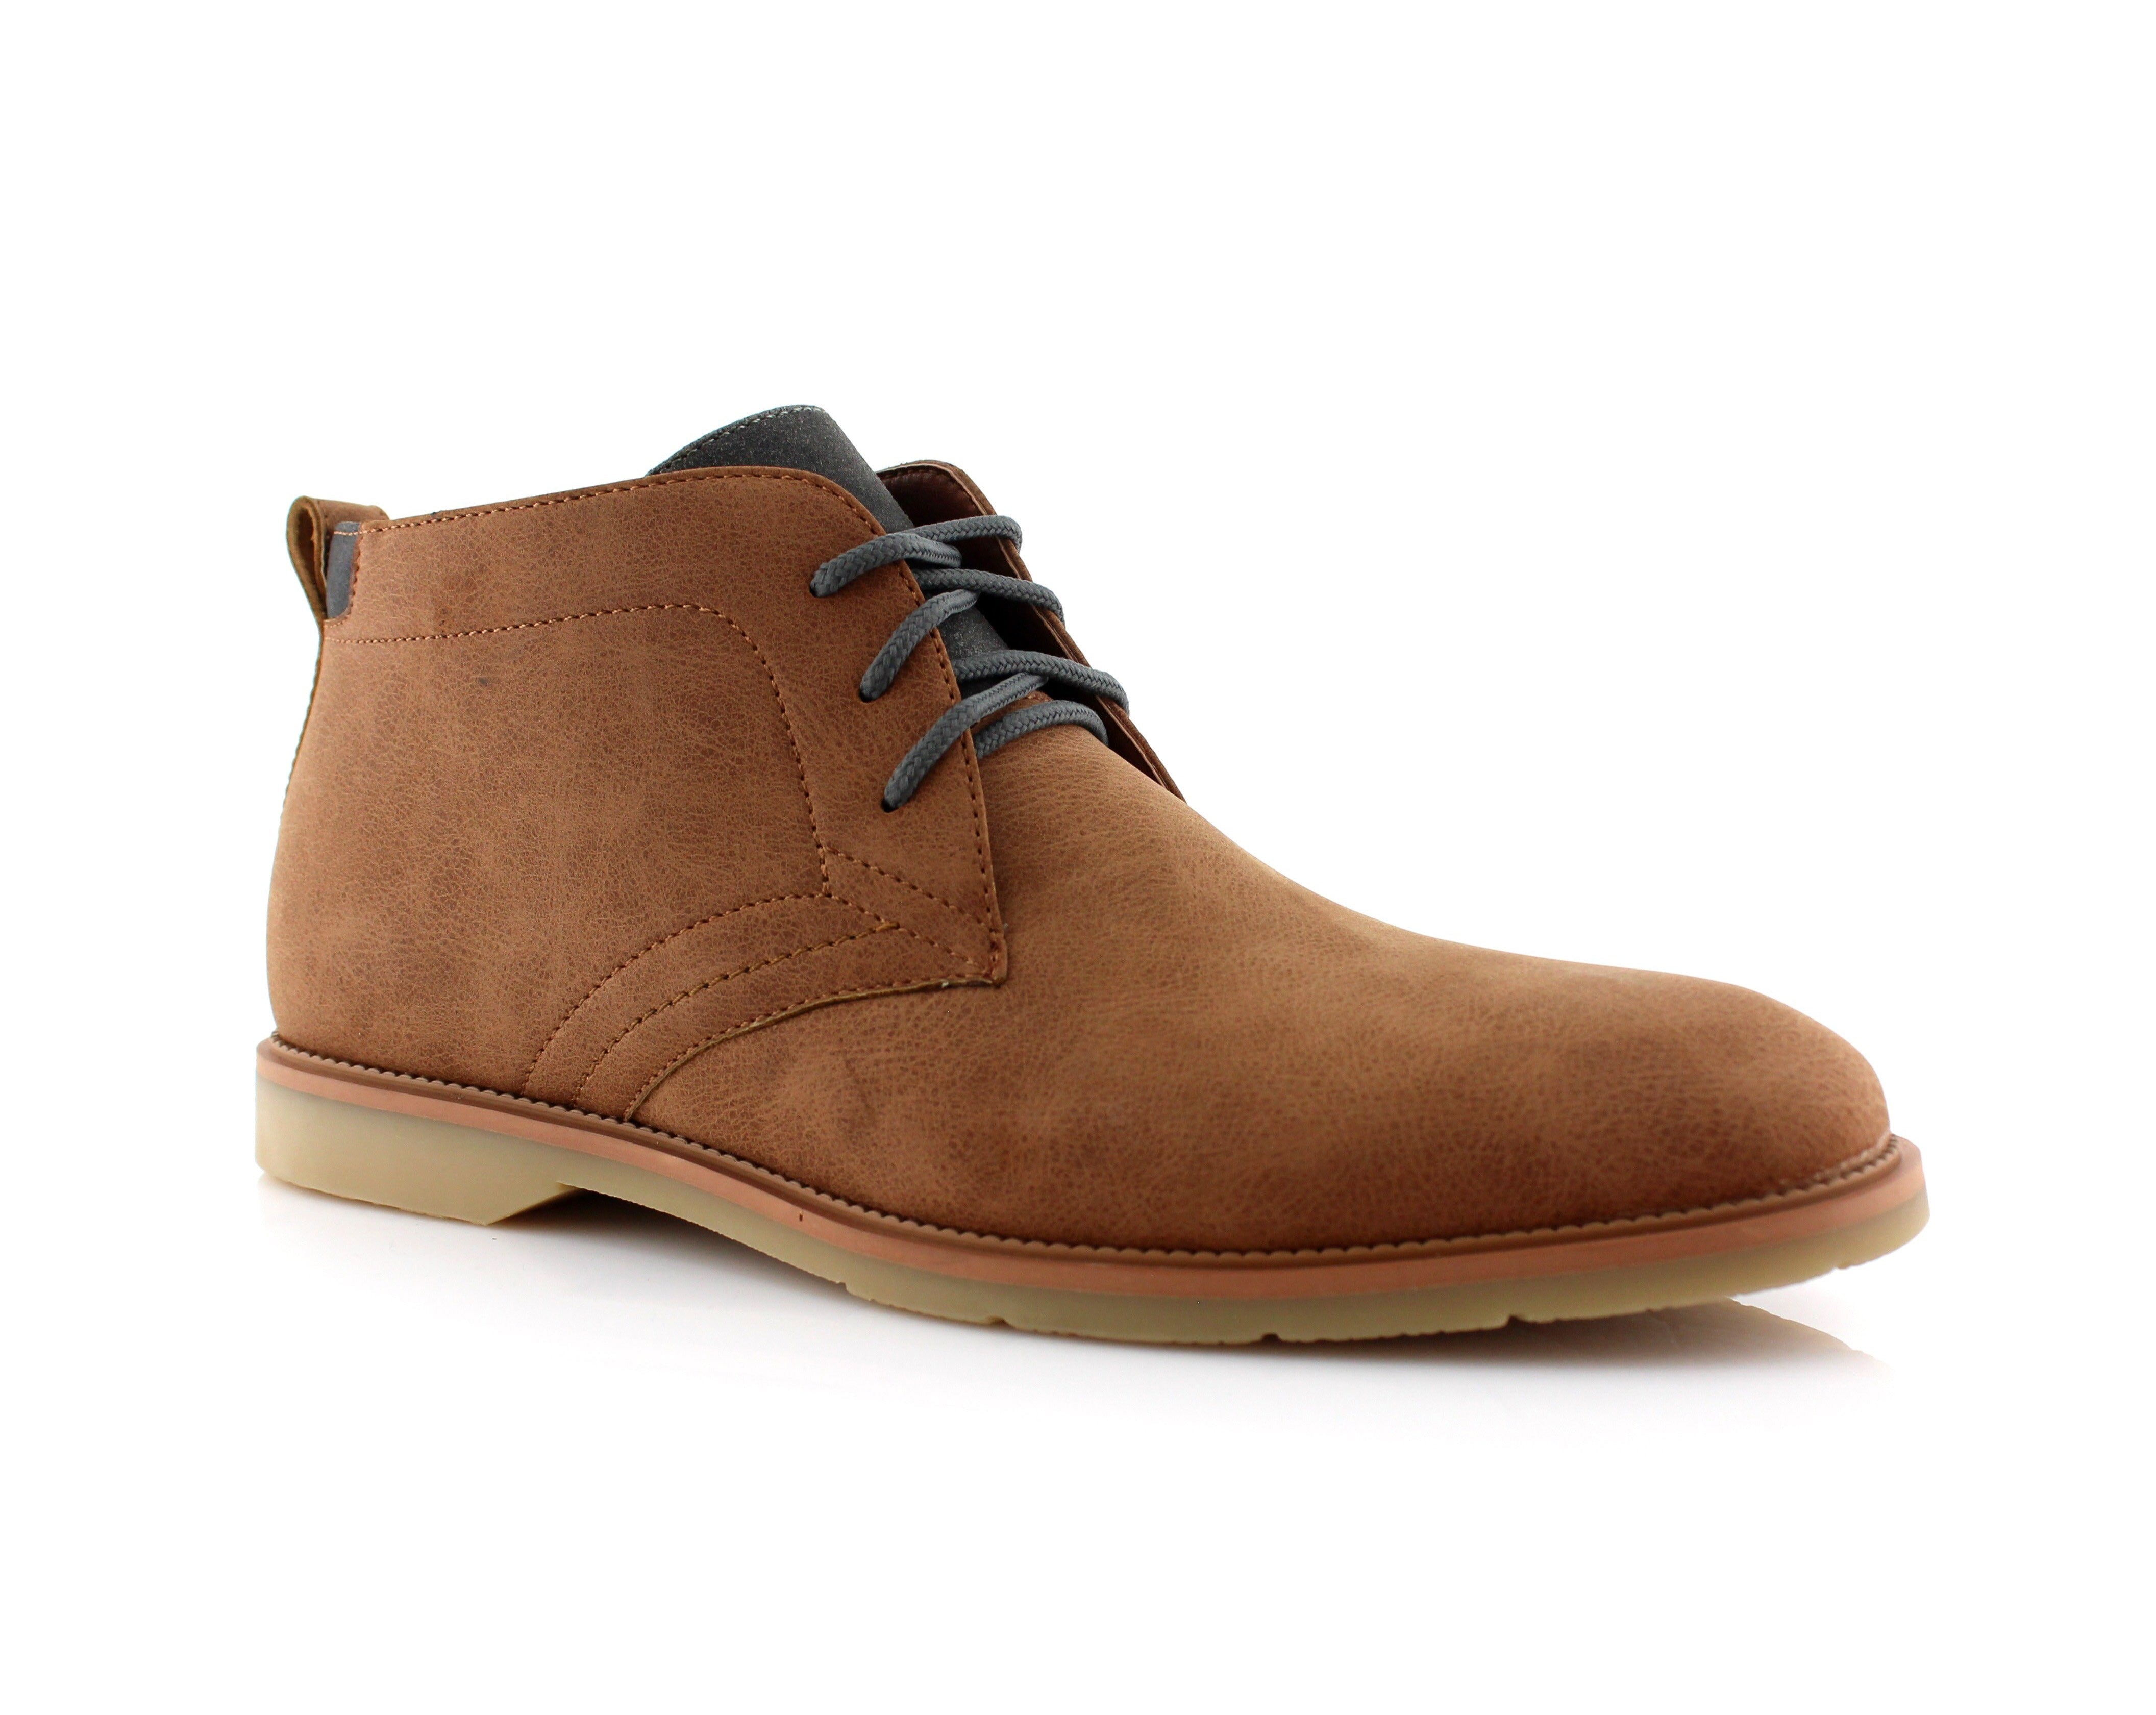 At sige sandheden Abe Dental Lace Up Fashion Casual Chukka | Marvin | Buy Ankle Boots